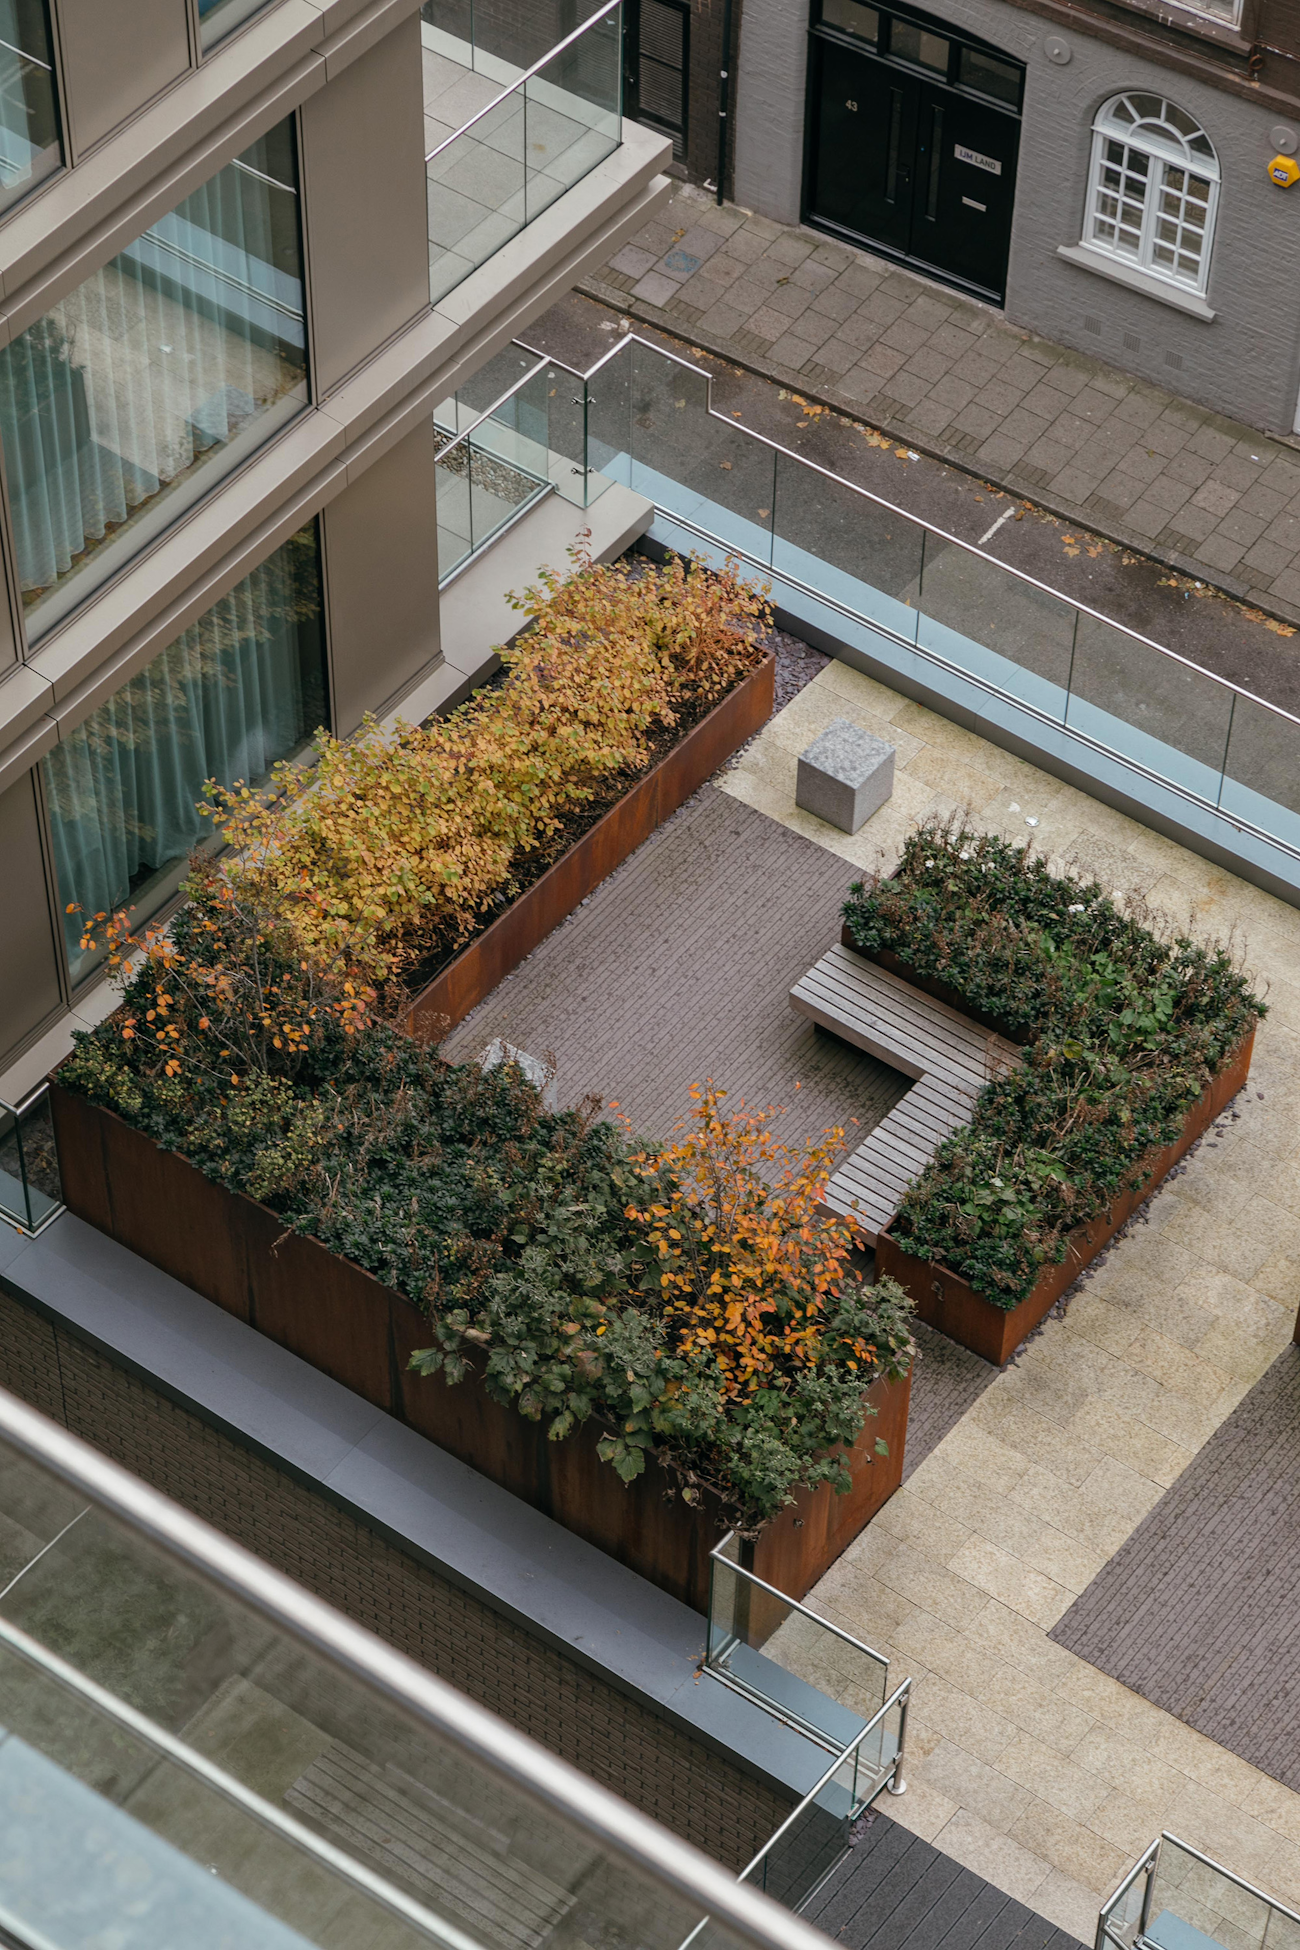 Terrace System at Royal Mint Gardens